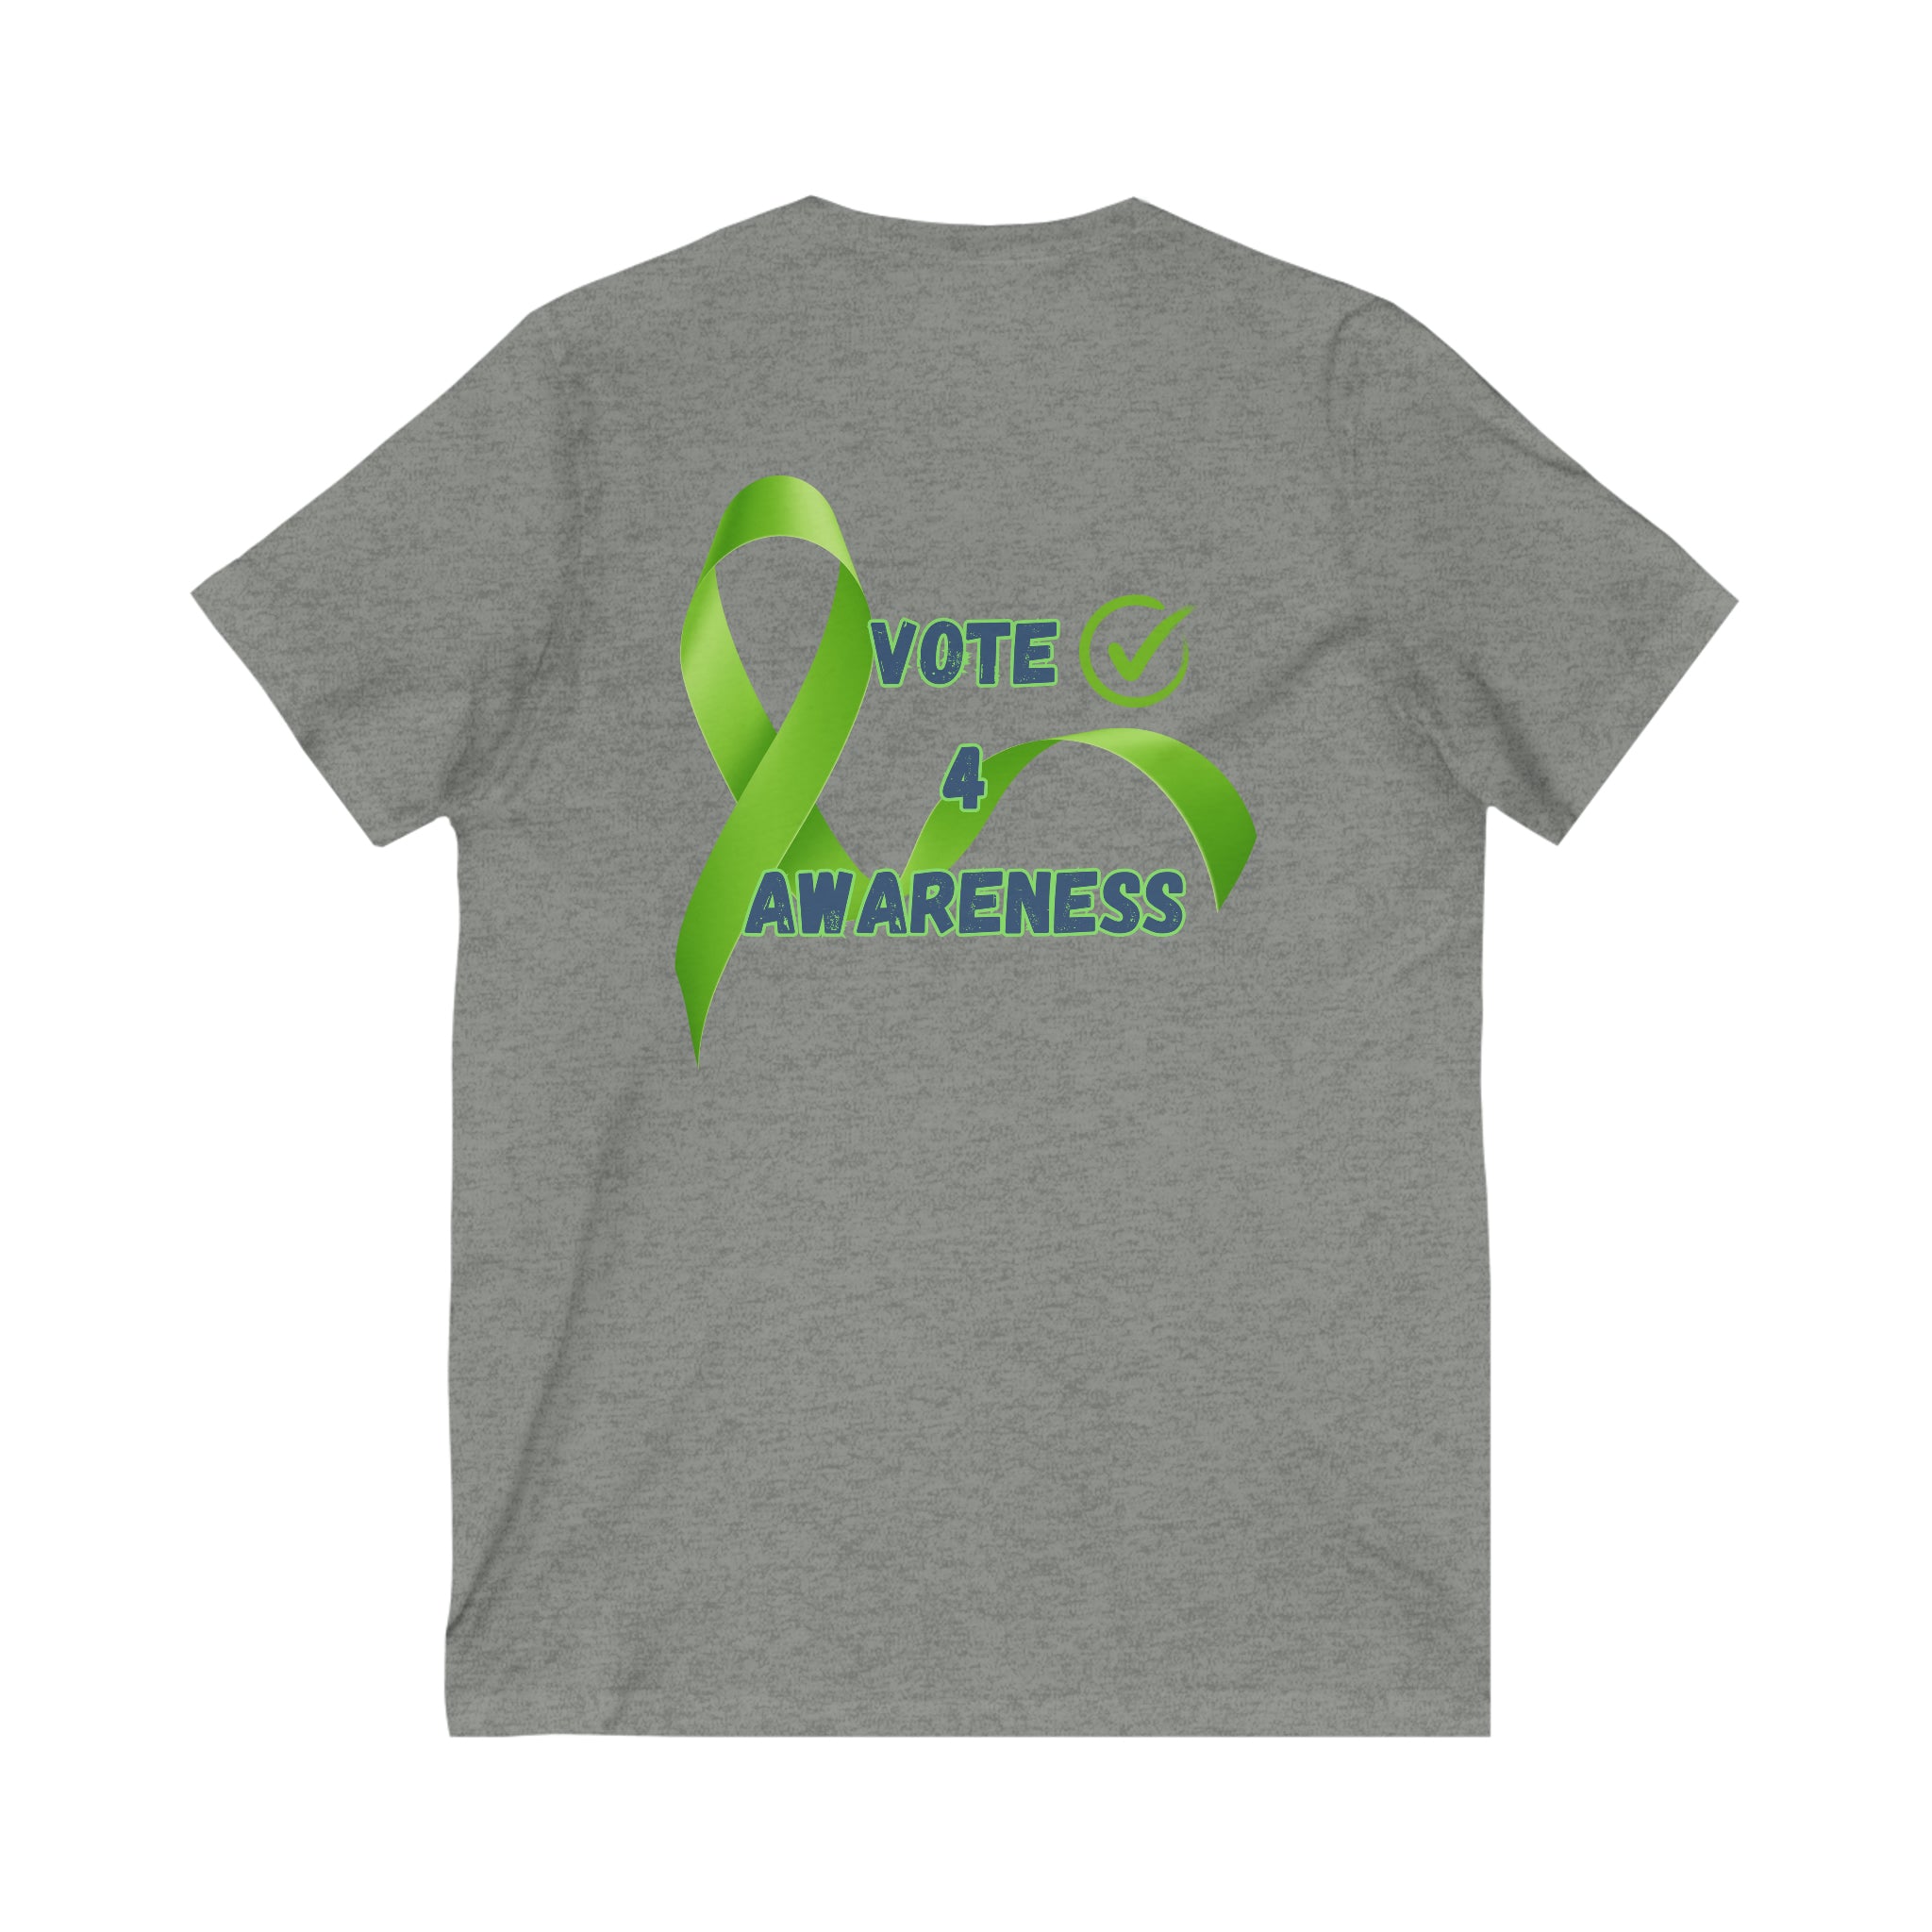 Vote 4 Awareness V-Neck T-Shirt Deep Heather Basic T-Shirt Casual Shirt Classic Tee Comfortable Tee Cotton T-Shirt Everyday Wear Graphic Tee Statement Shirt T-shirt Tee Collection Tee for all Tee for Men Tee for Women Unisex Apparel Vintage Tee V-neck 18237028885753152618_2048 Printify